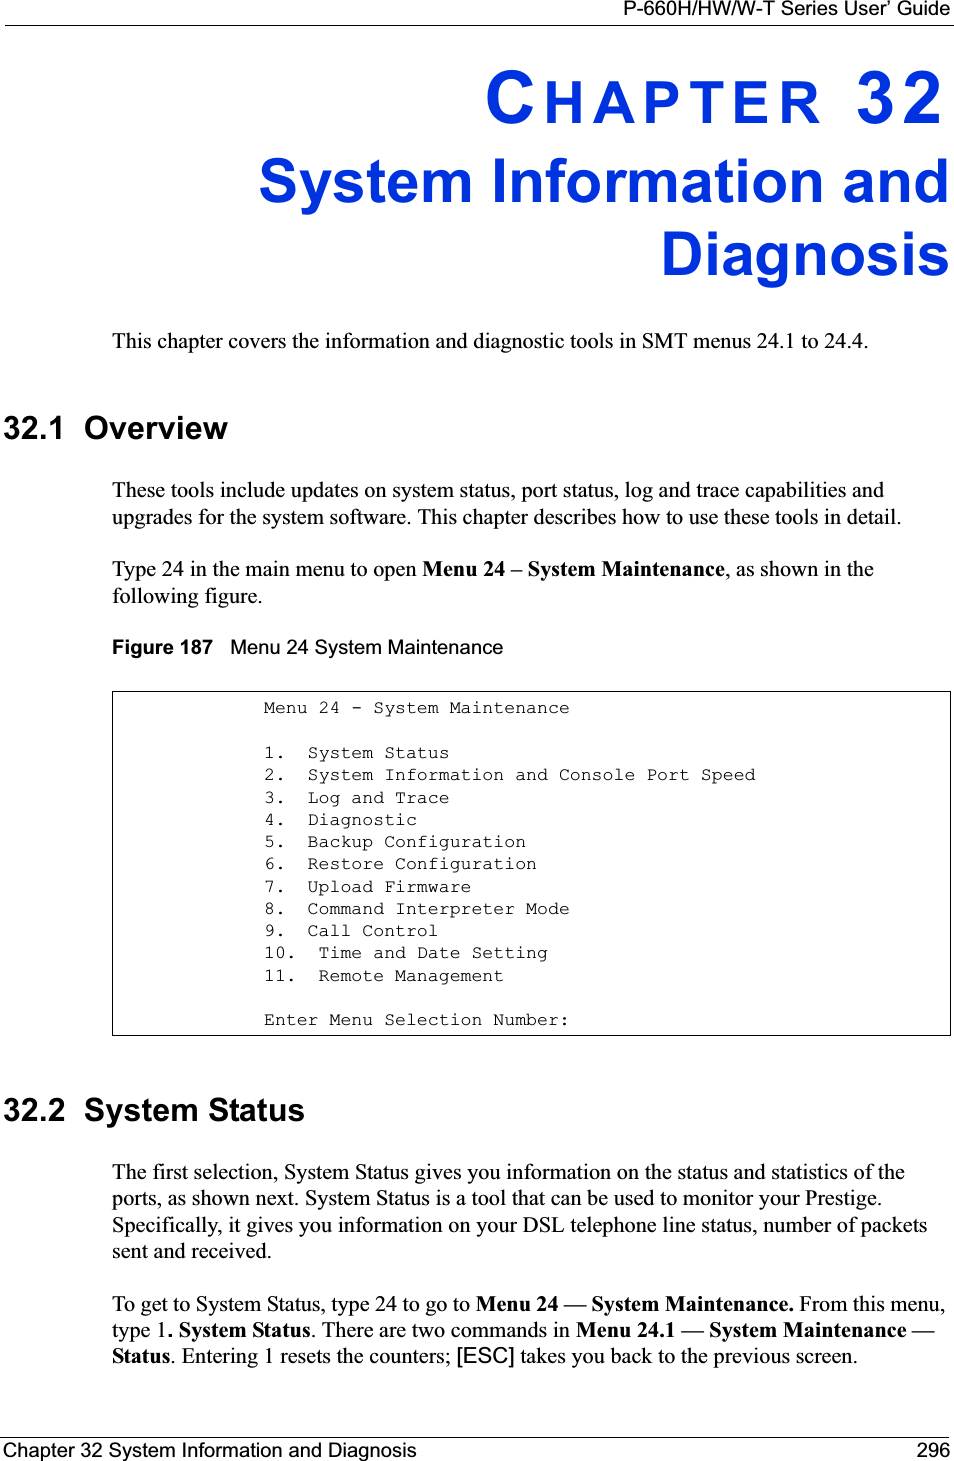 P-660H/HW/W-T Series User’ GuideChapter 32 System Information and Diagnosis 296CHAPTER 32System Information andDiagnosisThis chapter covers the information and diagnostic tools in SMT menus 24.1 to 24.4.32.1  OverviewThese tools include updates on system status, port status, log and trace capabilities and upgrades for the system software. This chapter describes how to use these tools in detail.Type 24 in the main menu to open Menu 24 – System Maintenance, as shown in the following figure.Figure 187   Menu 24 System Maintenance32.2  System StatusThe first selection, System Status gives you information on the status and statistics of the ports, as shown next. System Status is a tool that can be used to monitor your Prestige. Specifically, it gives you information on your DSL telephone line status, number of packets sent and received.To get to System Status, type 24 to go to Menu 24 — System Maintenance. From this menu, type 1.System Status. There are two commands in Menu 24.1 — System Maintenance —Status. Entering 1 resets the counters; [ESC] takes you back to the previous screen.Menu 24 - System Maintenance1.  System Status2.  System Information and Console Port Speed3.  Log and Trace4.  Diagnostic5.  Backup Configuration6.  Restore Configuration7.  Upload Firmware8.  Command Interpreter Mode9.  Call Control10.  Time and Date Setting11.  Remote Management      Enter Menu Selection Number: